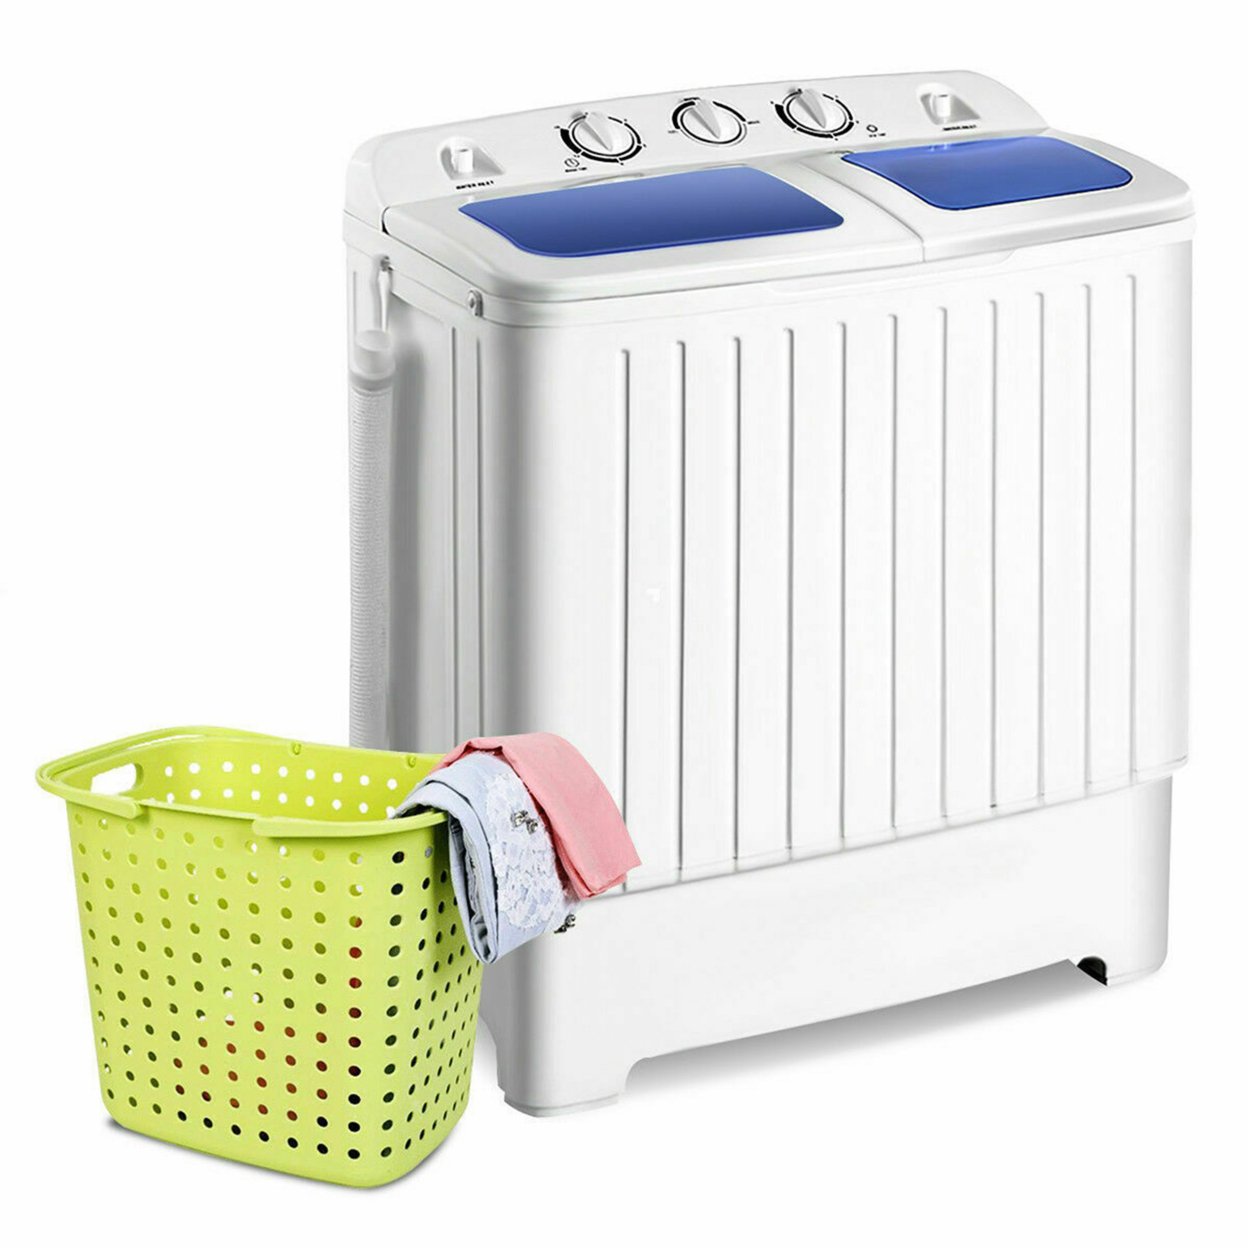 Gymax Compact Portable Washing Machine Twin Tub 17.6 lbs Washer Spinner Home Dorm